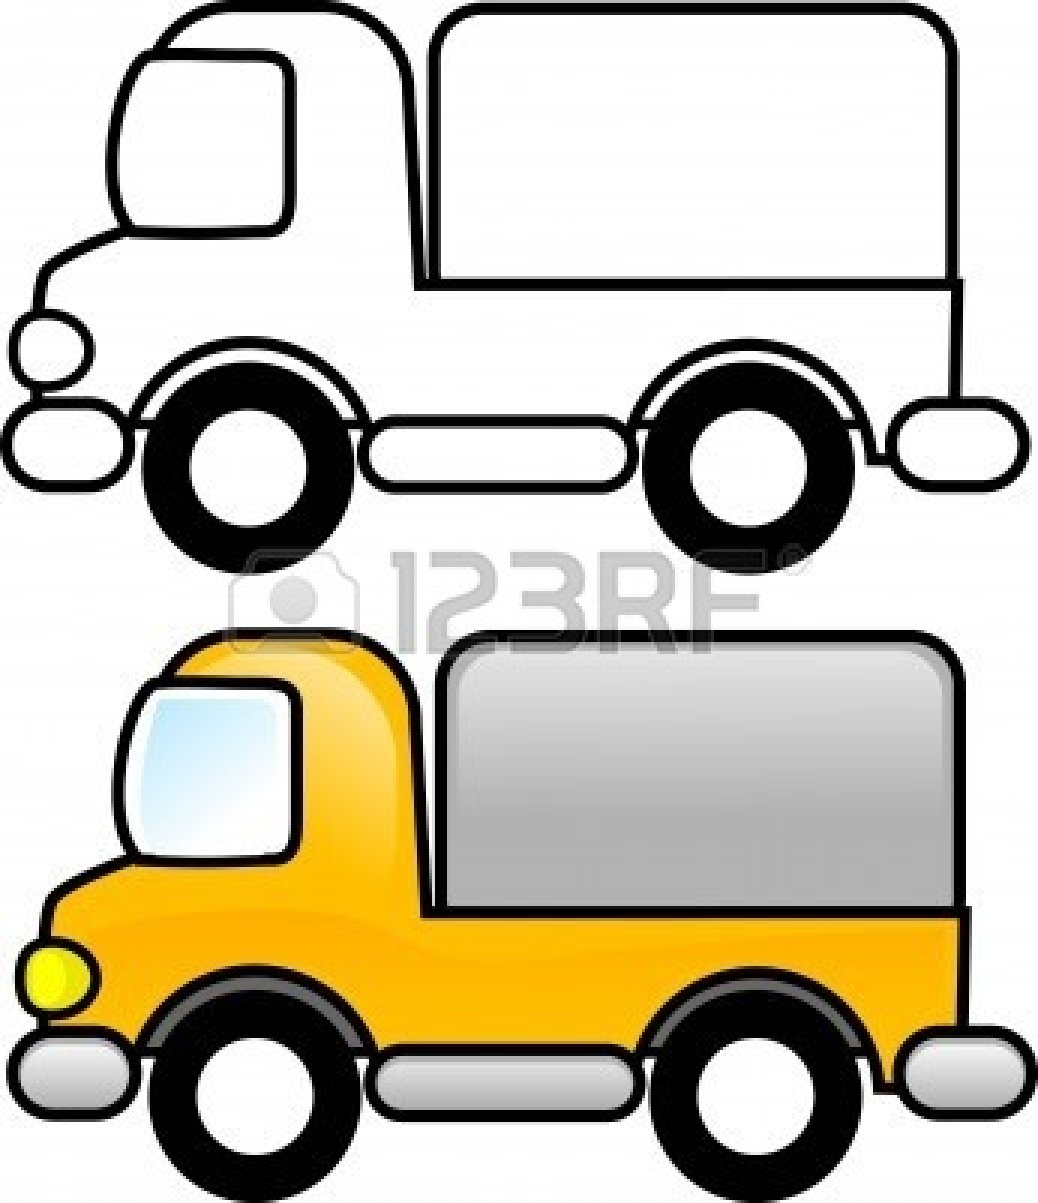 Toy Truck Clipart   Clipart Panda   Free Clipart Images